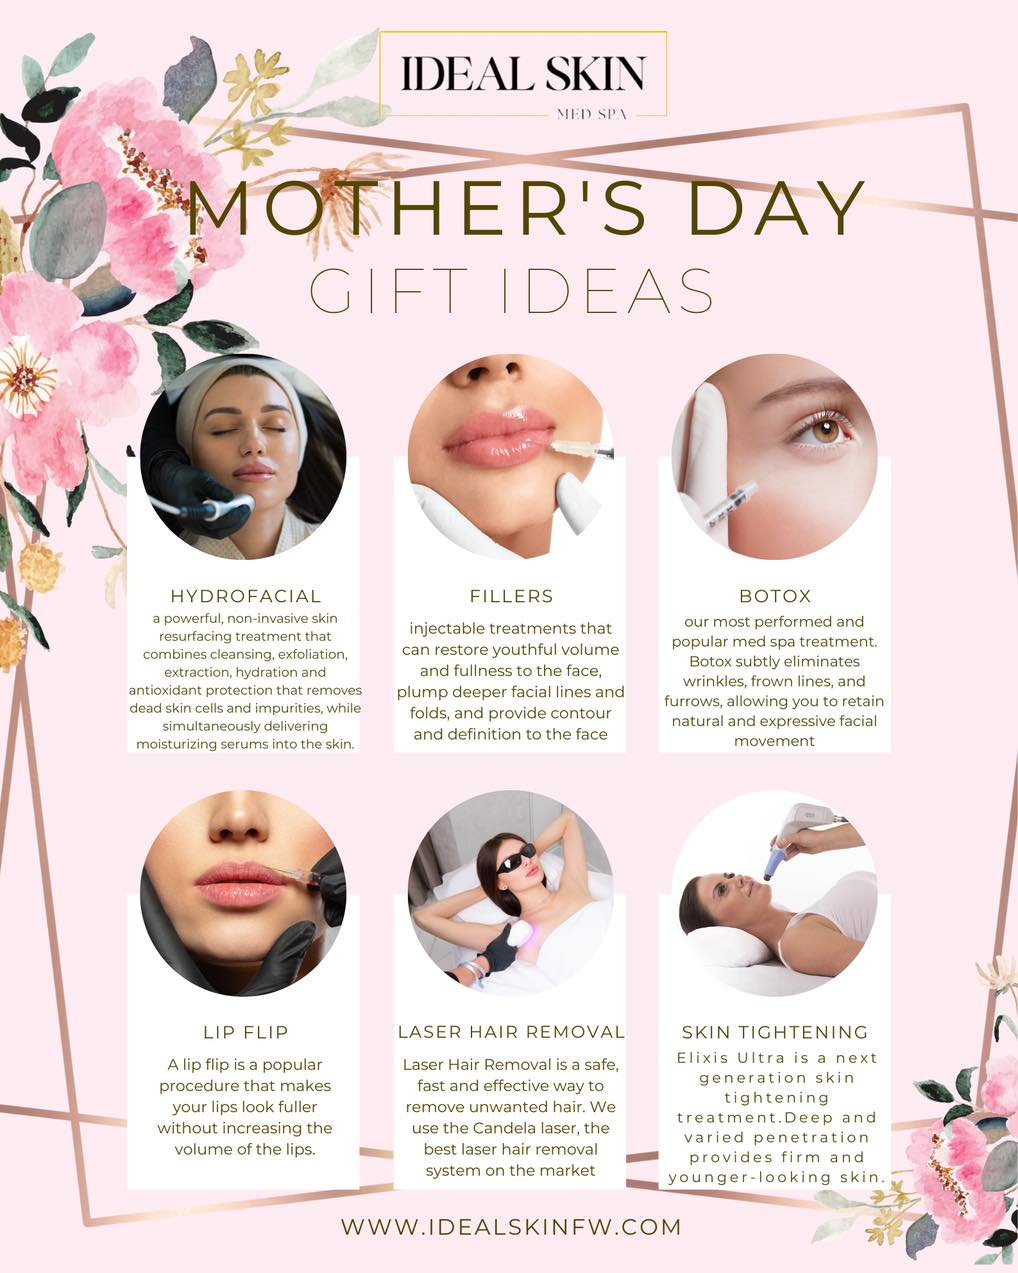 Treat Mom to what she really loves this year.  She can enjoy the gift of relaxation and rejuvenation with an Ideal Skin Med Spa gift certificate!
Show her how much you appreciate all that she does with a gift that will leave her feeling refreshed and